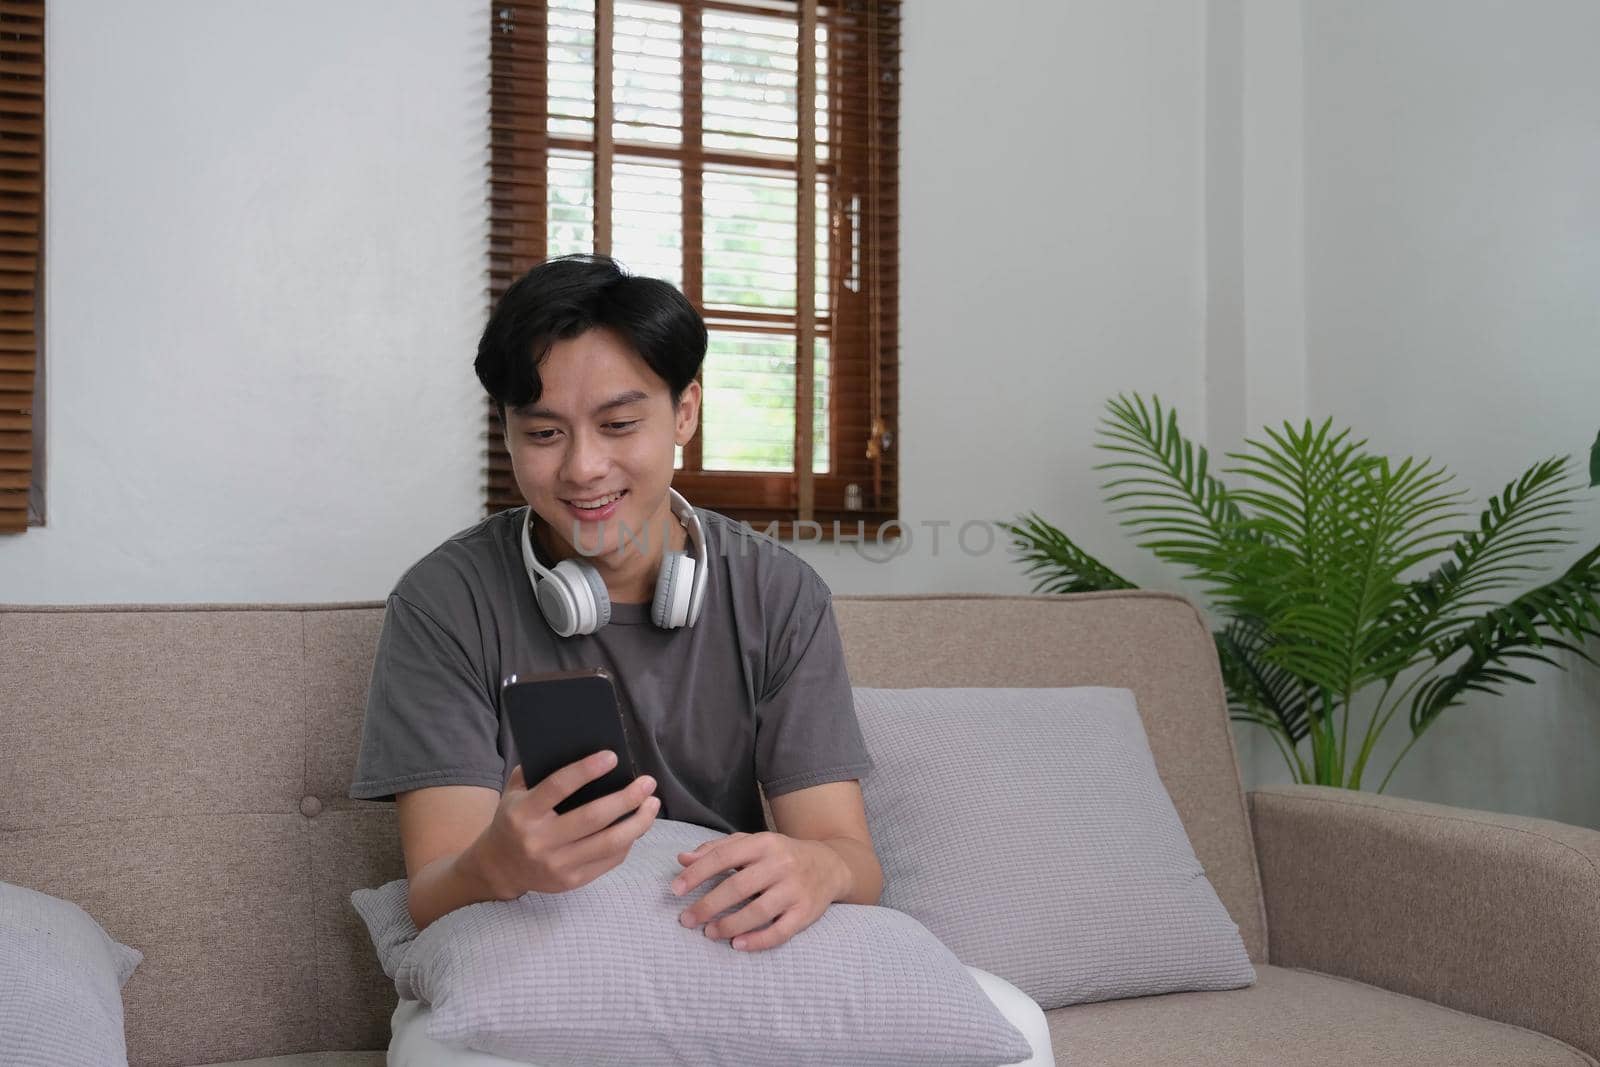 Handsome Asian man using smartphone while headphones sitting on sofa at home.